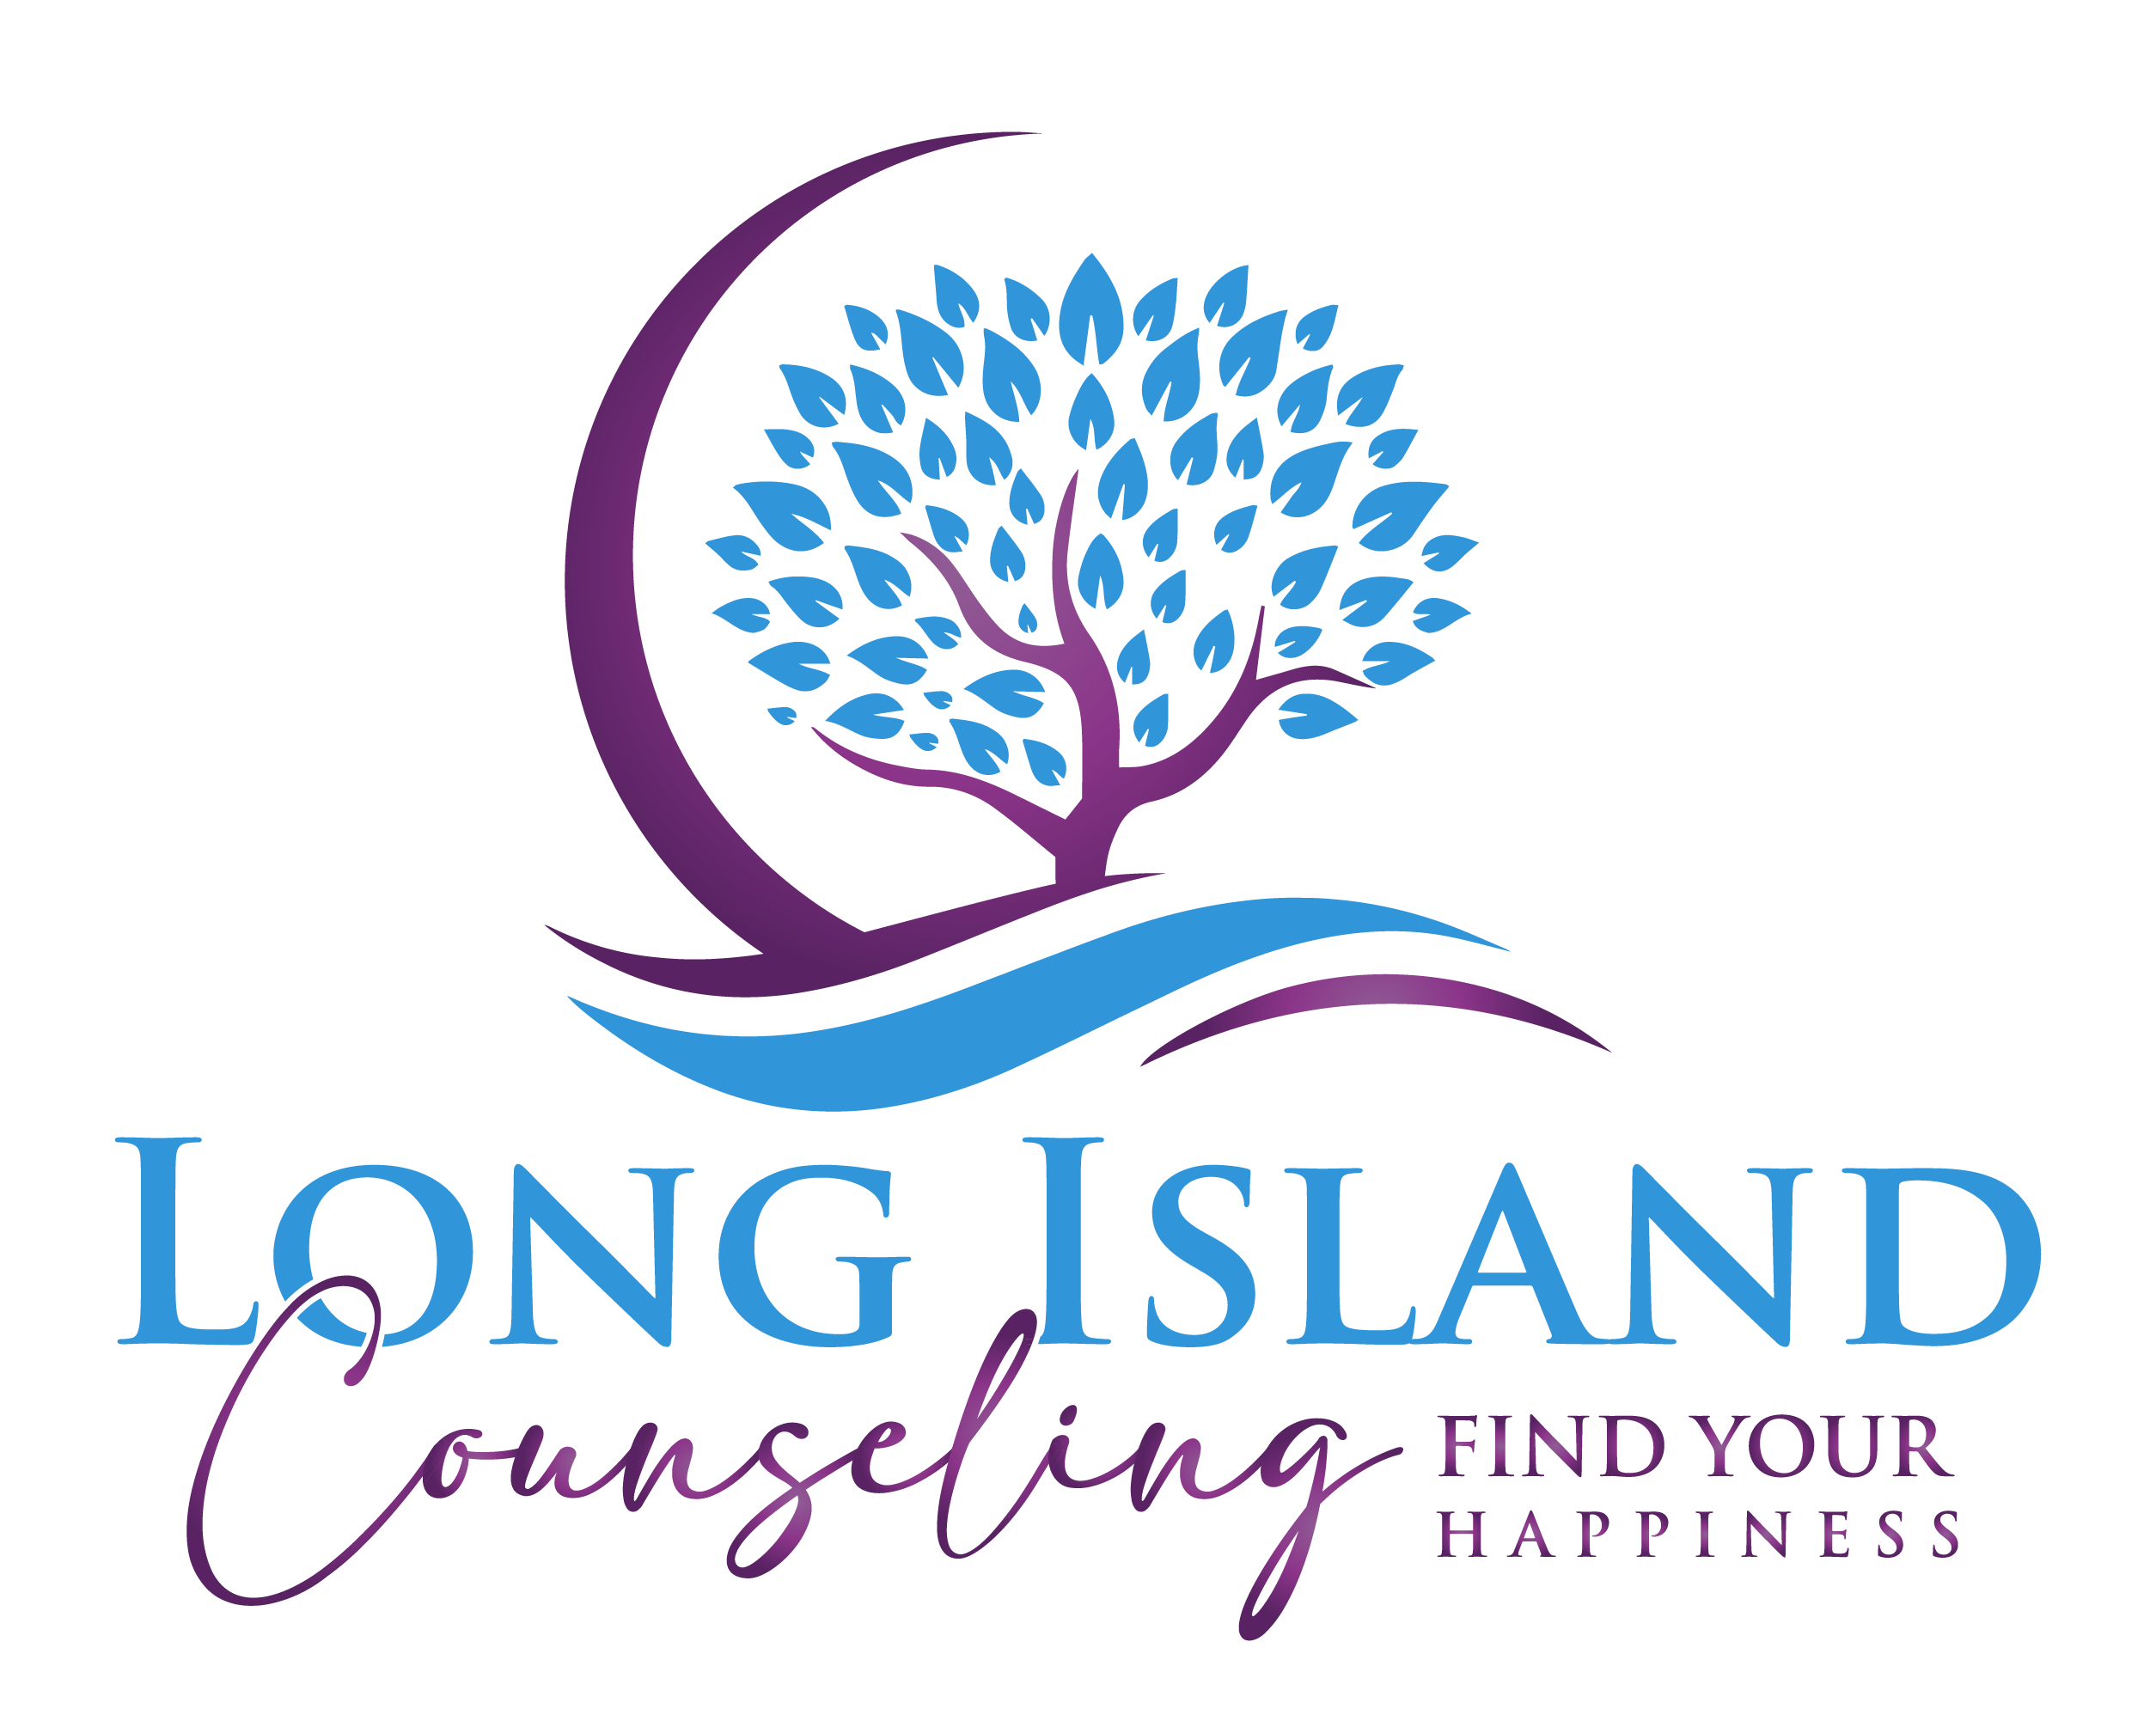 Long Island Counseling Services Logo